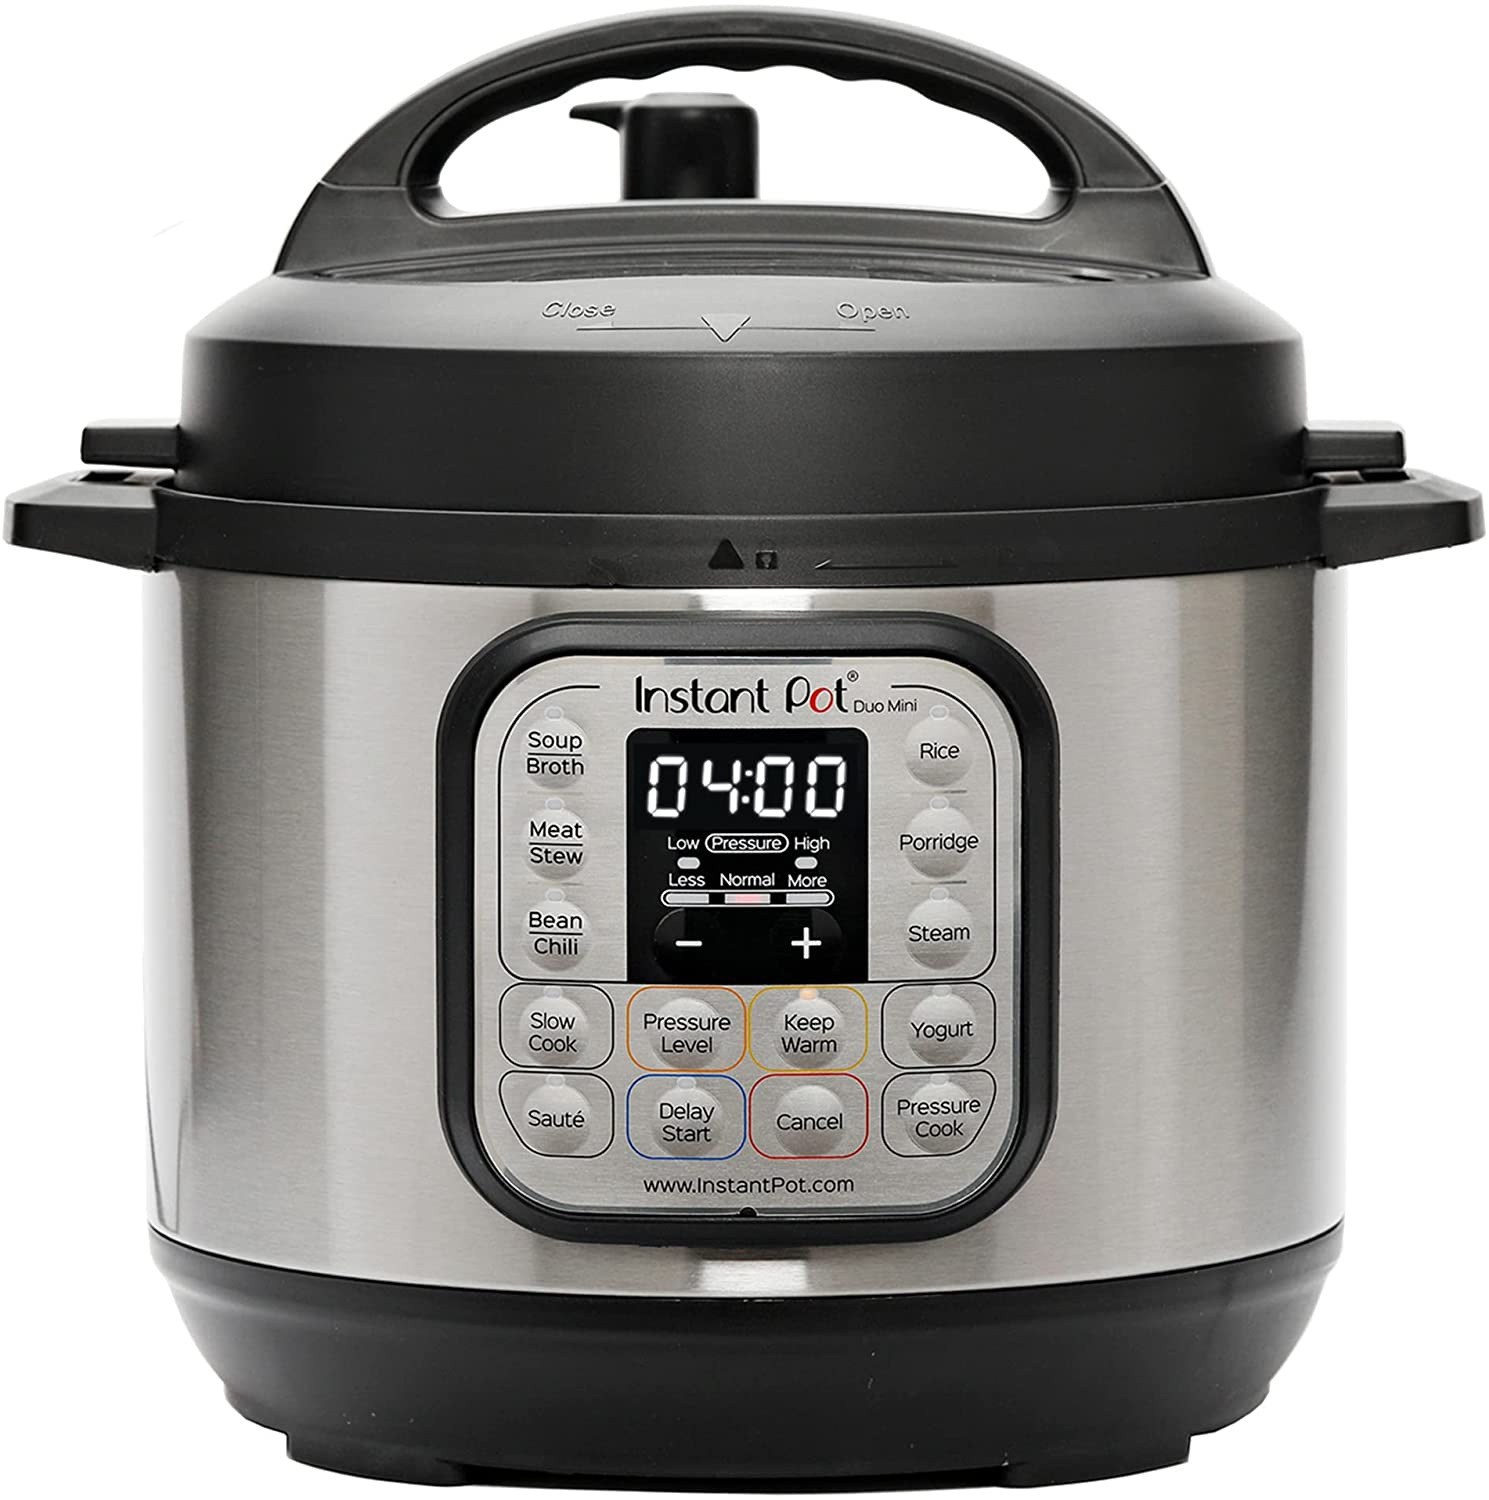 Instant Pot Duo 7-In-1 Electric Pressure Cooker, Slow Cooker, Rice Cooker, Steam